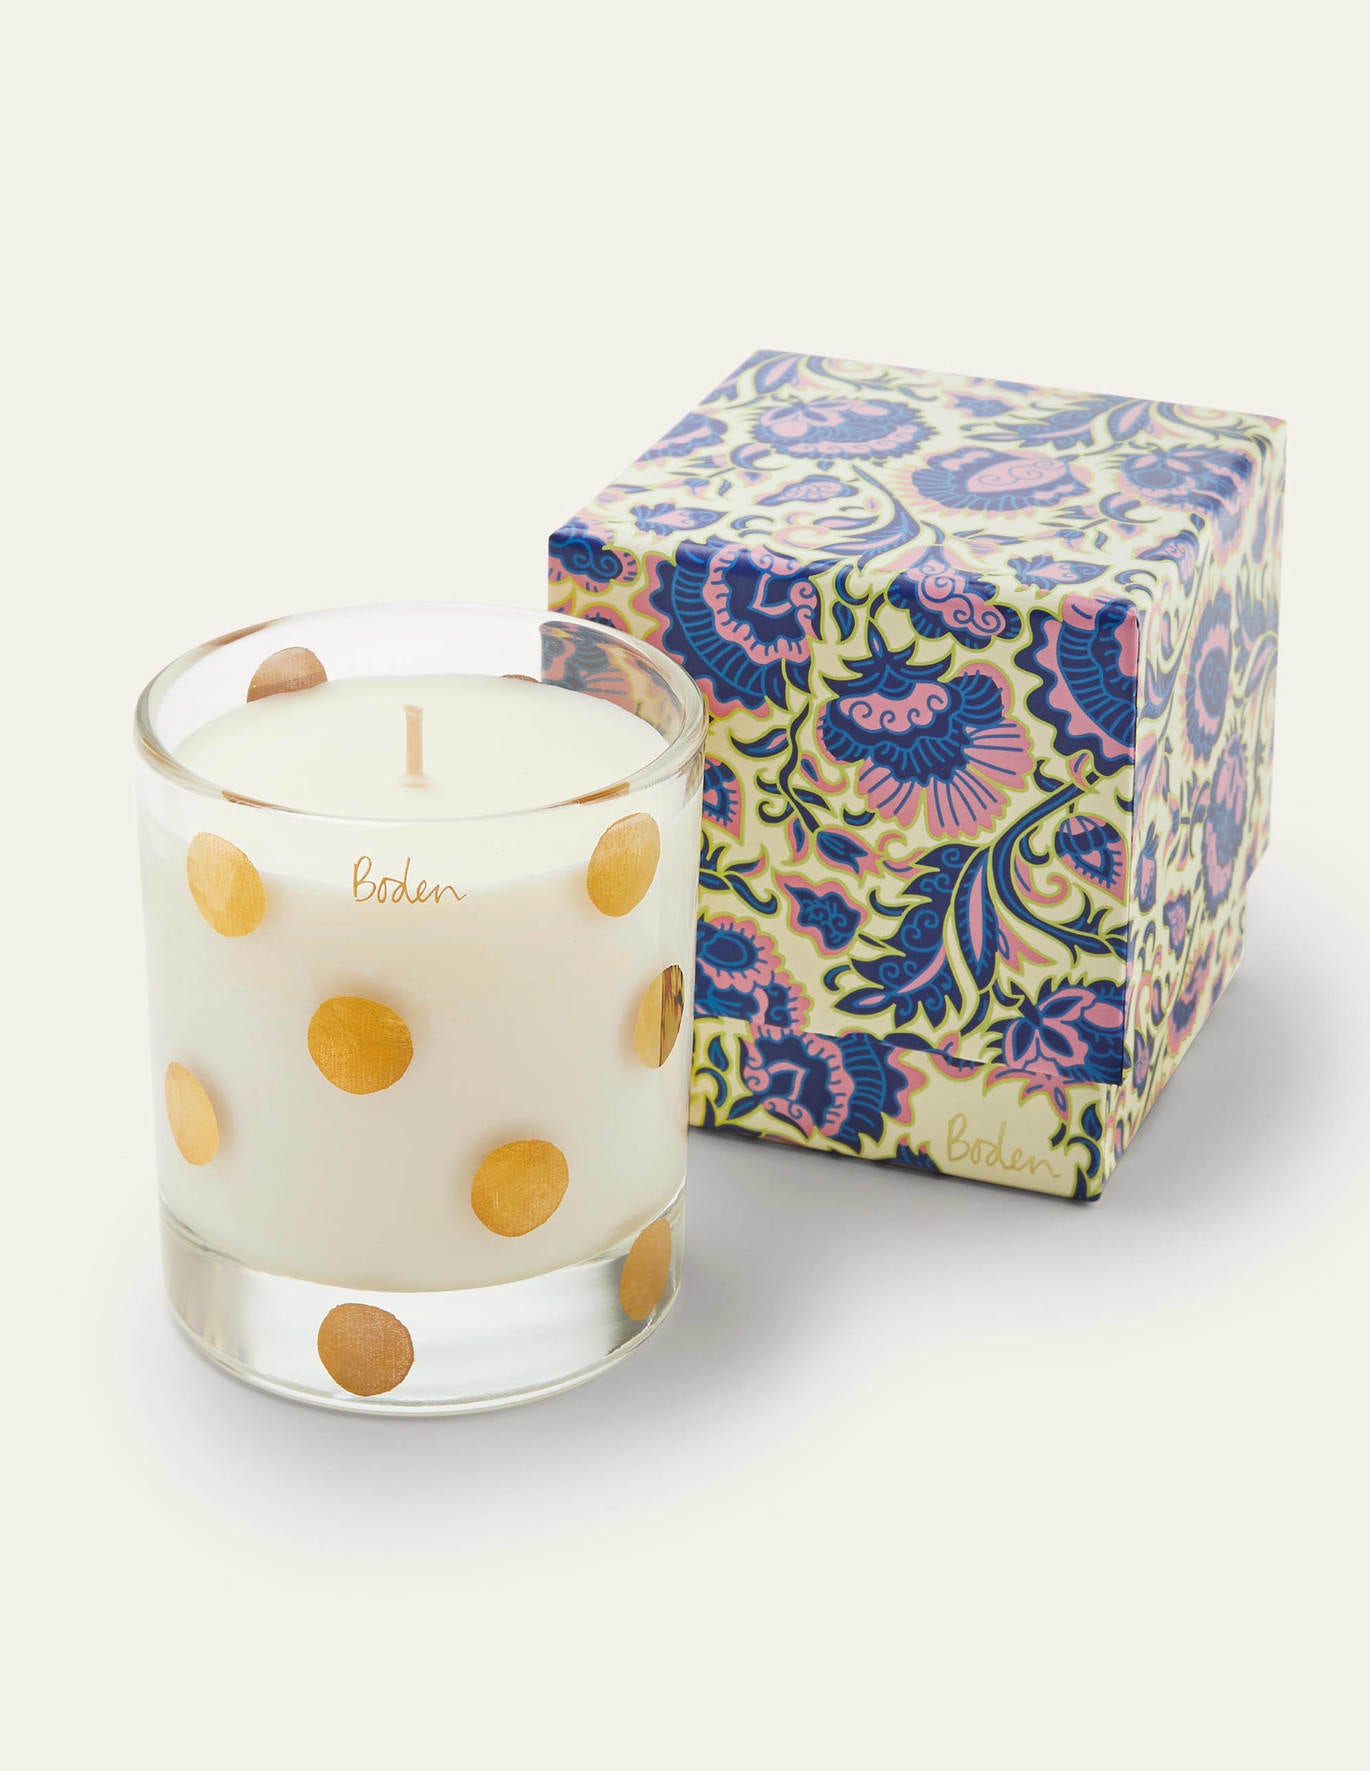 Boden Rose Scented Candle - Cassis Berry & Rose